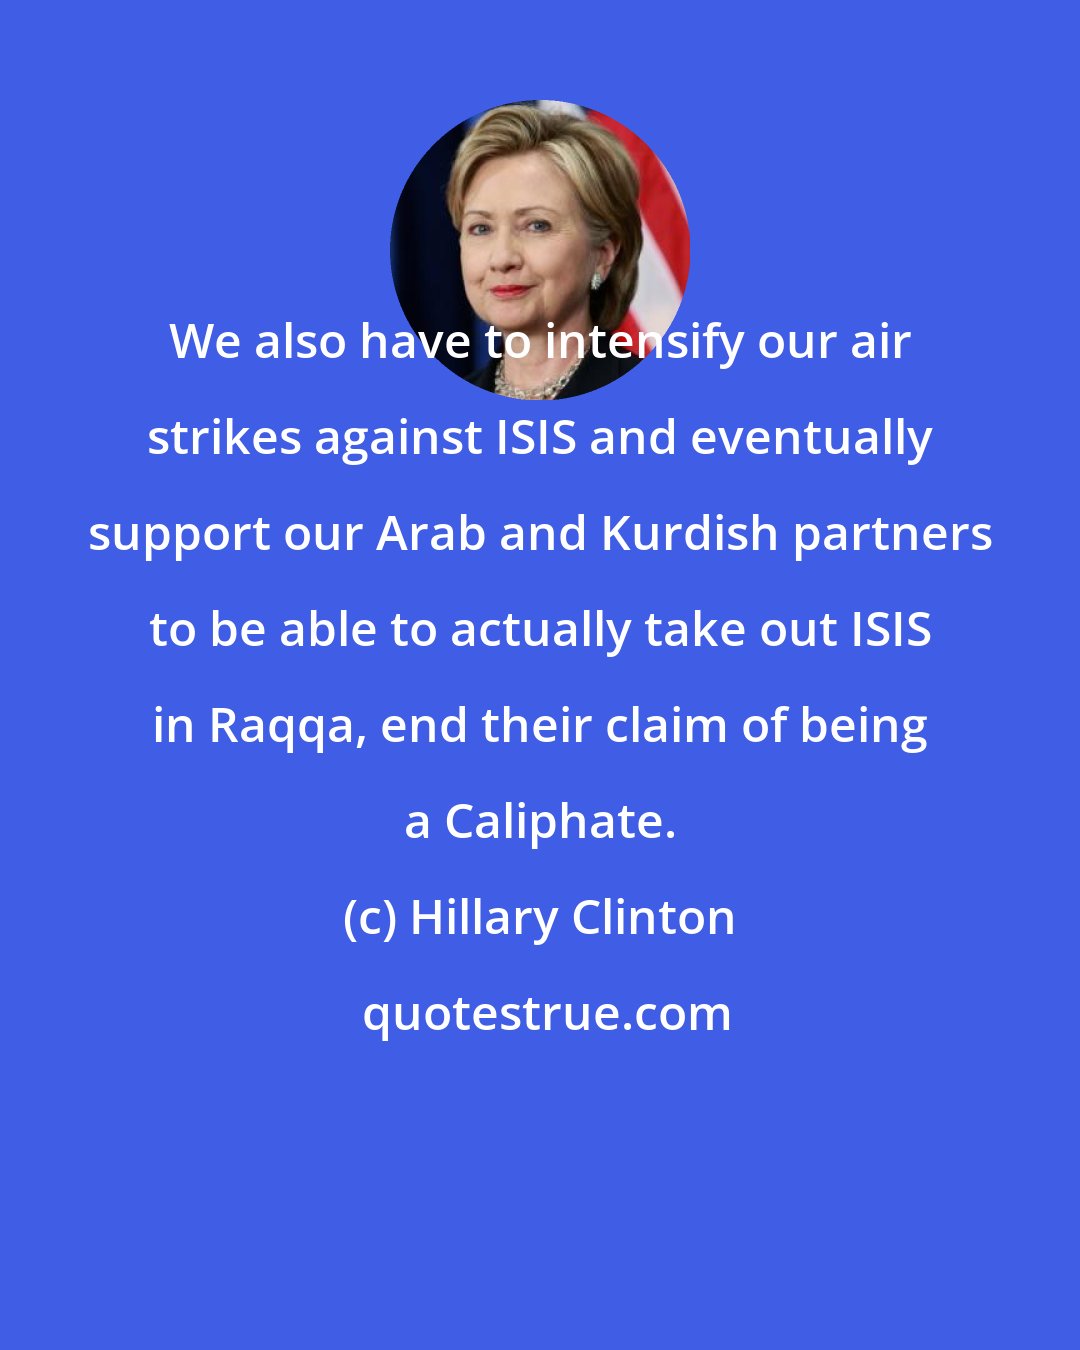 Hillary Clinton: We also have to intensify our air strikes against ISIS and eventually support our Arab and Kurdish partners to be able to actually take out ISIS in Raqqa, end their claim of being a Caliphate.